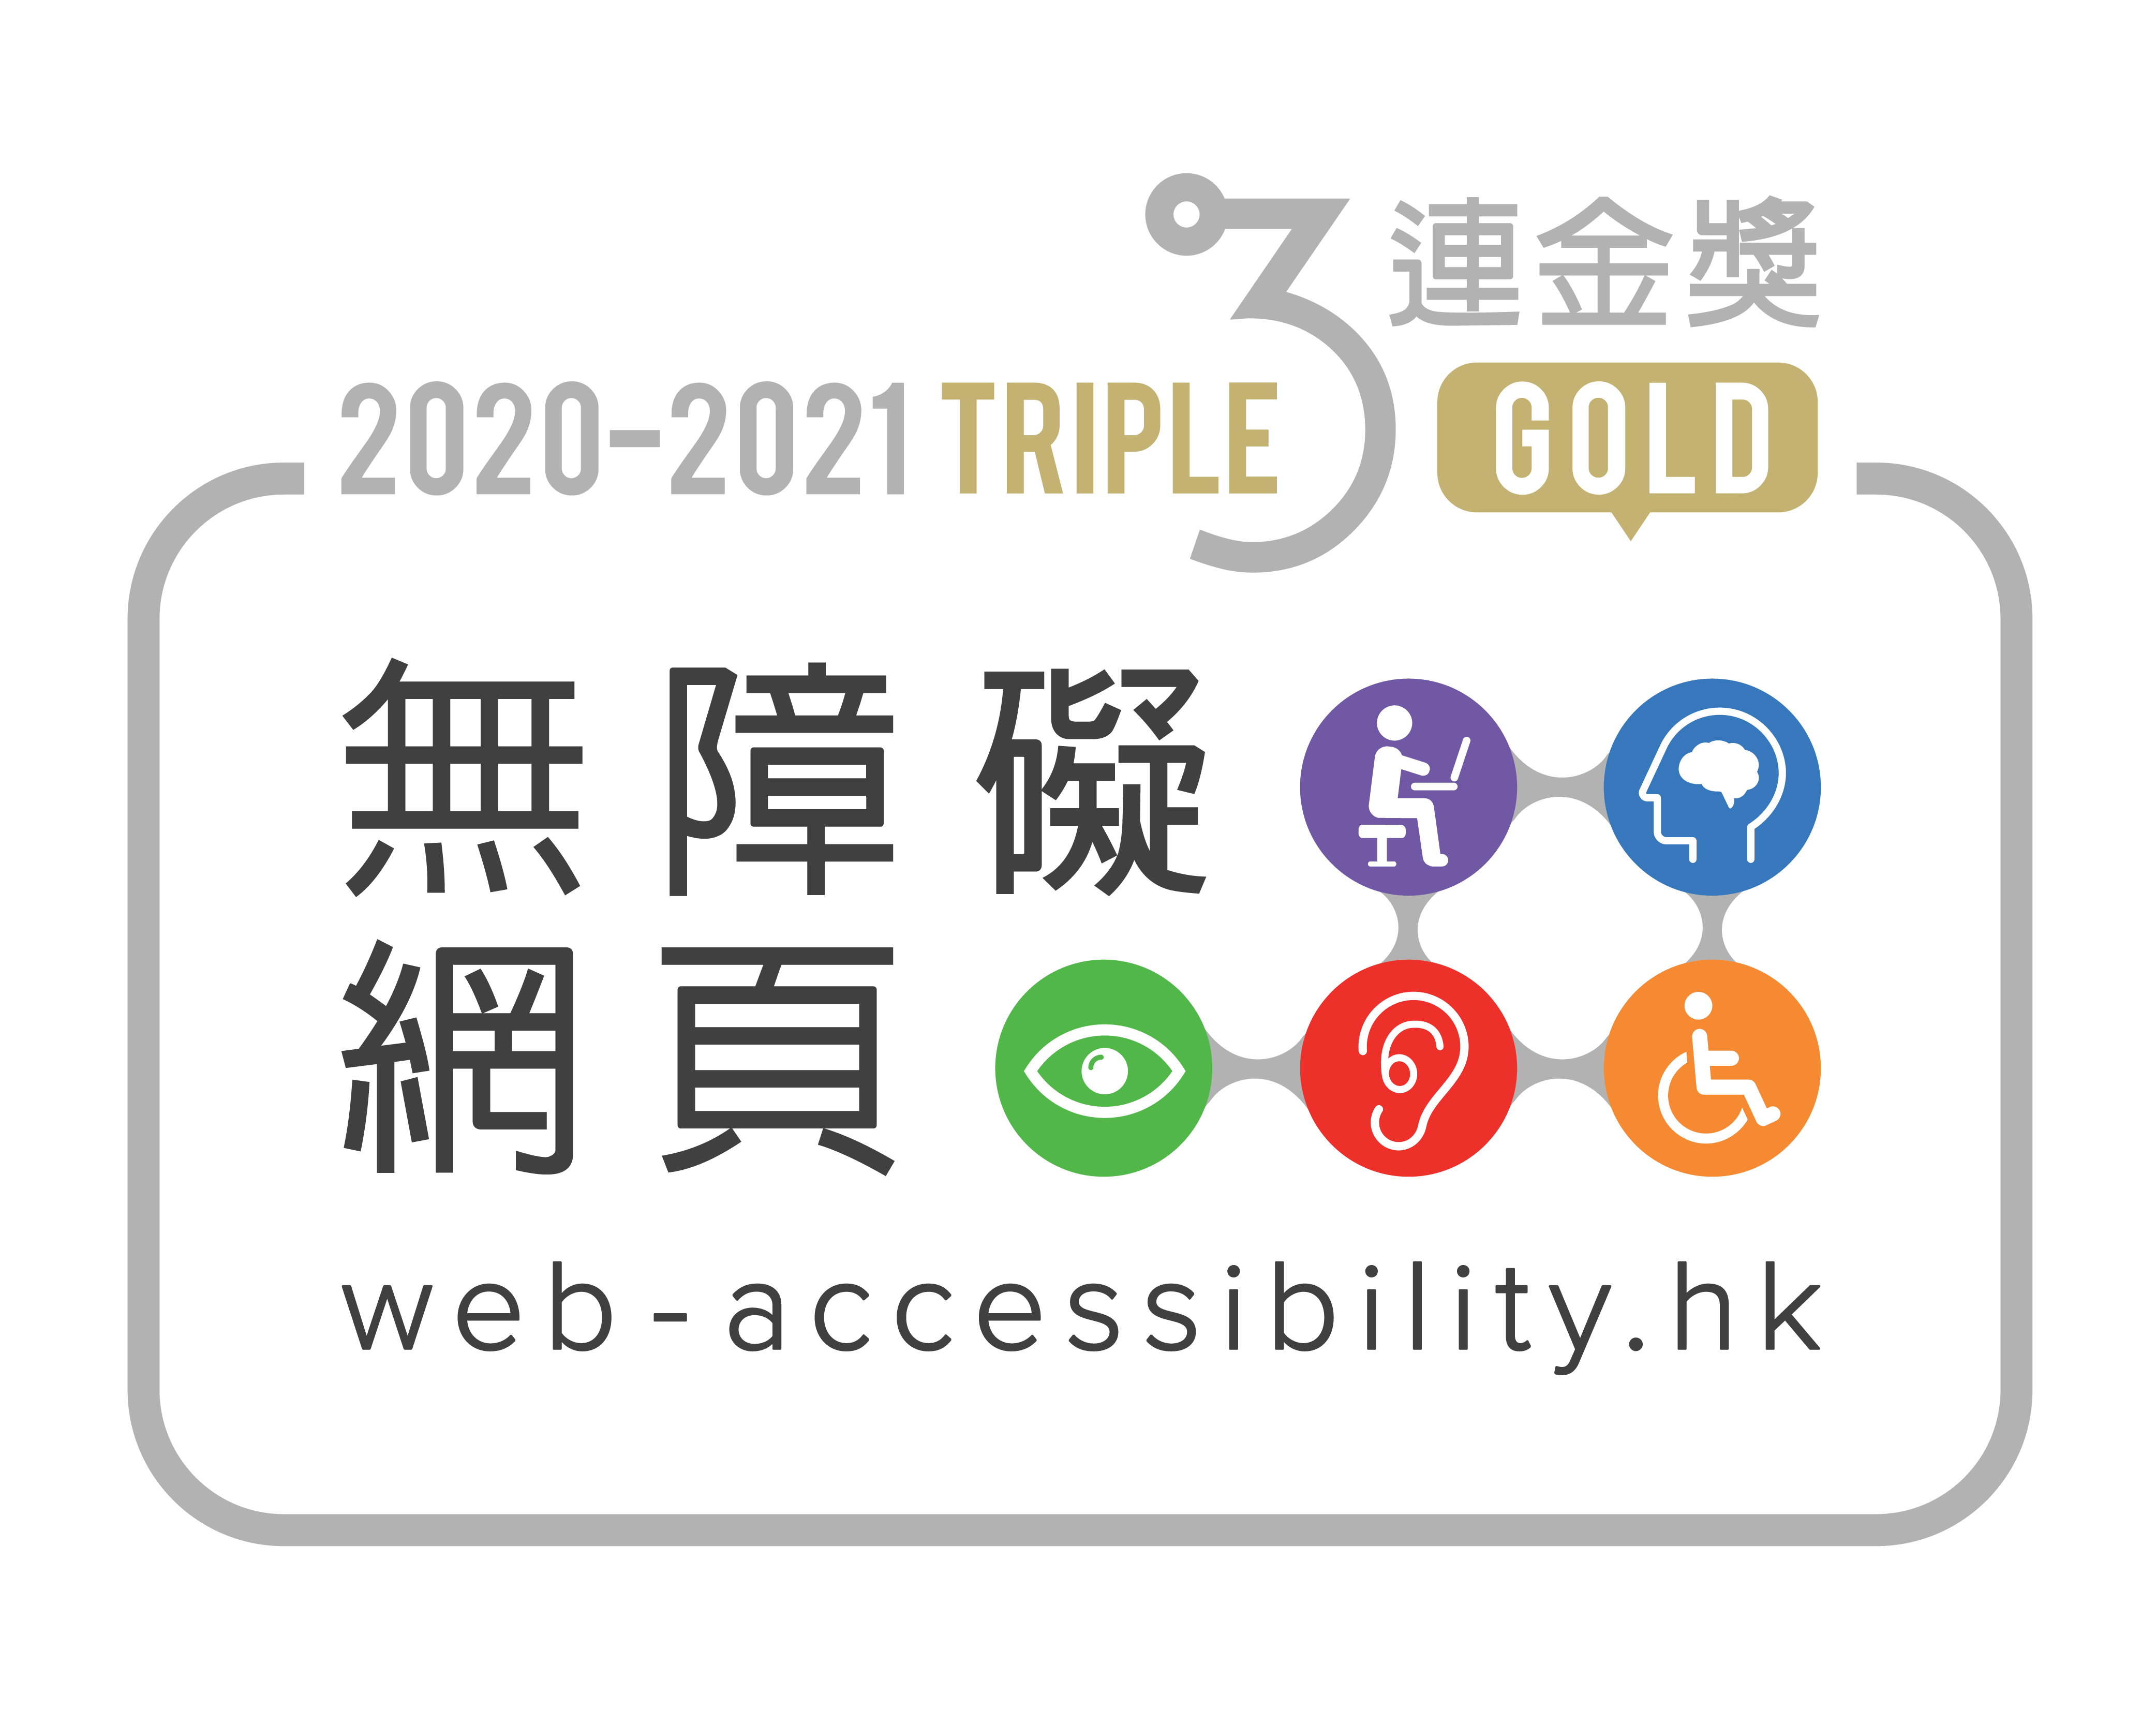 HKCEC website was awarded “Triple Gold Award” in the Web Accessibility Recognition Scheme 2020-2021, organised by Hong Kong Internet Registration Corporation Limited (HKIRC).